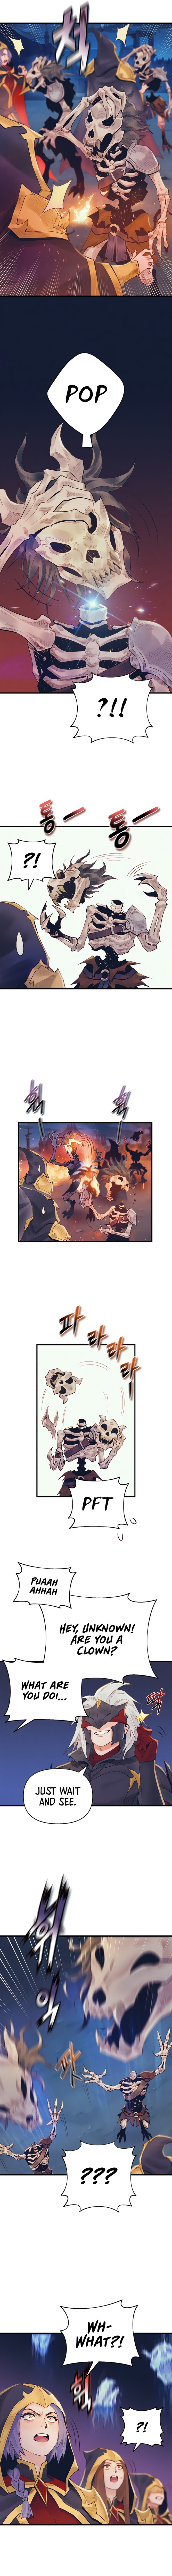 the-healing-priest-of-the-sun-chap-35-2